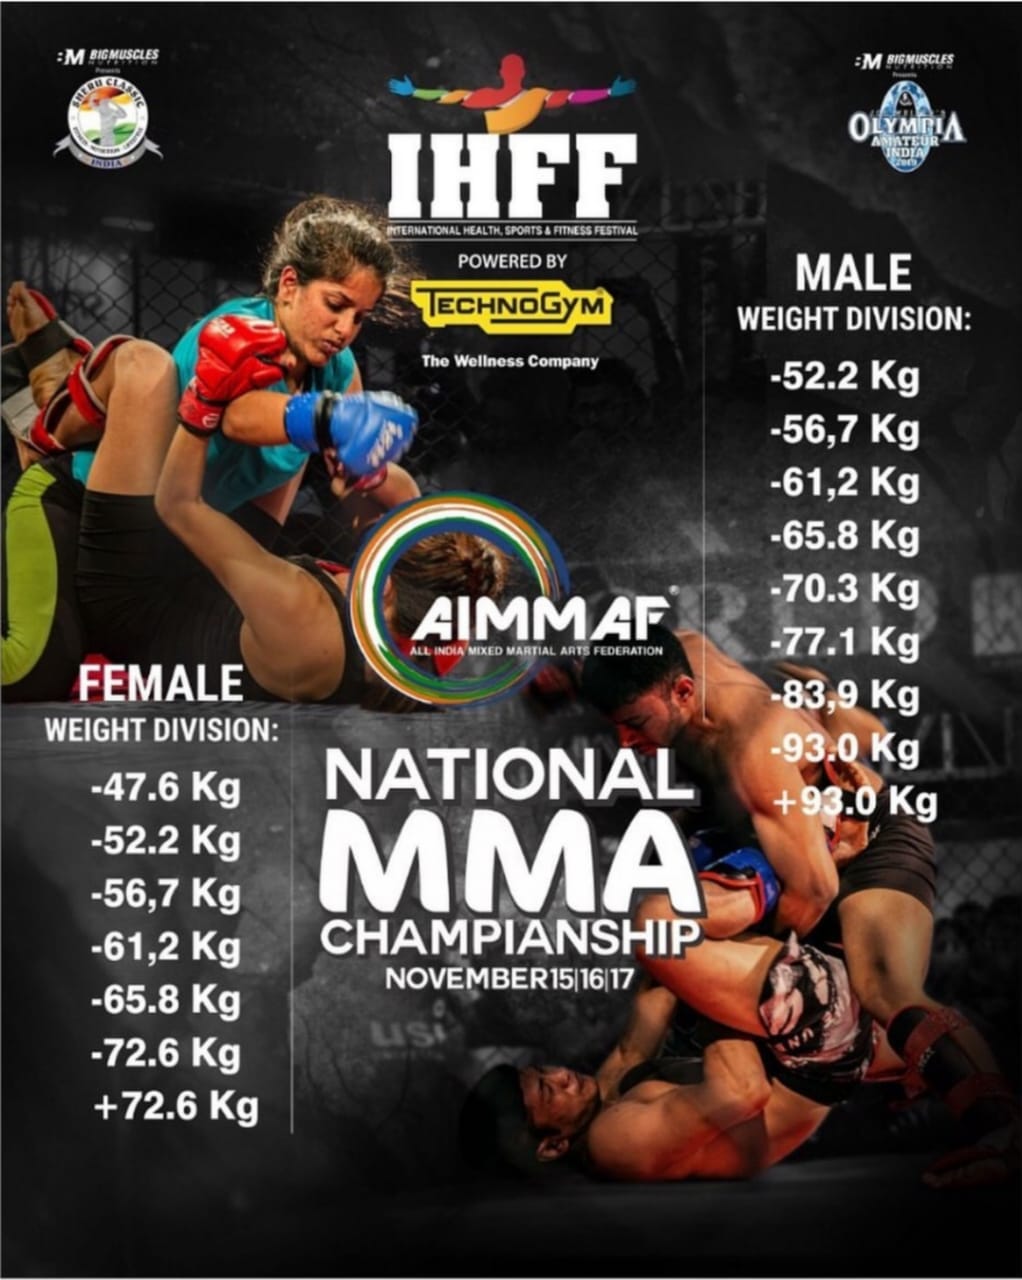 Here are the results of the recently concluded 3 Day Fight event ( MMA & Kickboxing ) organised by AIMMAF - IHFF